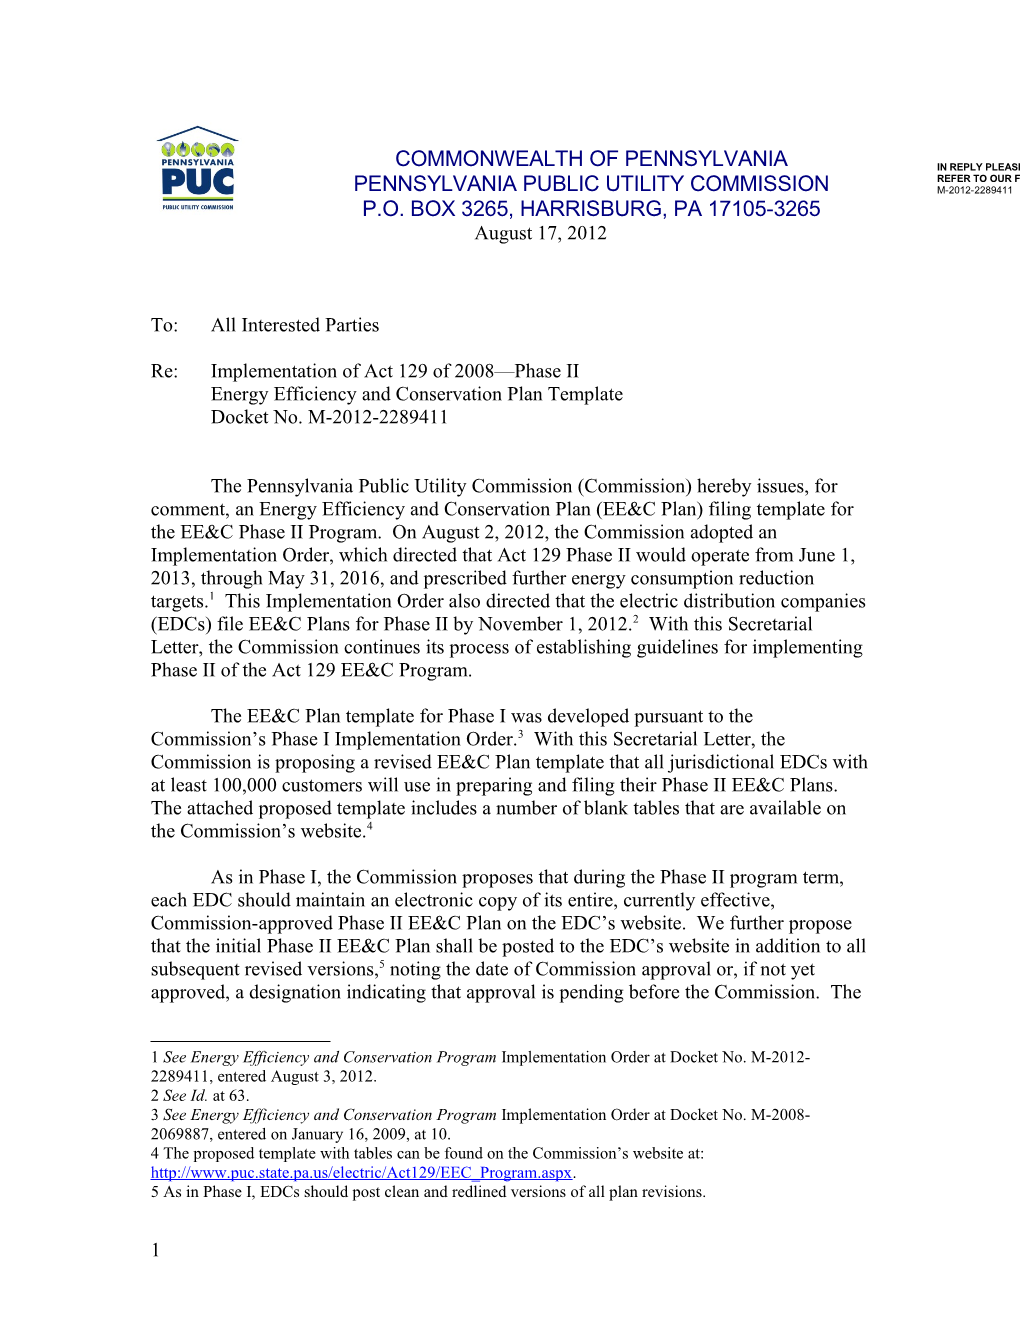 Energy Efficiency and Conservation Plan Template